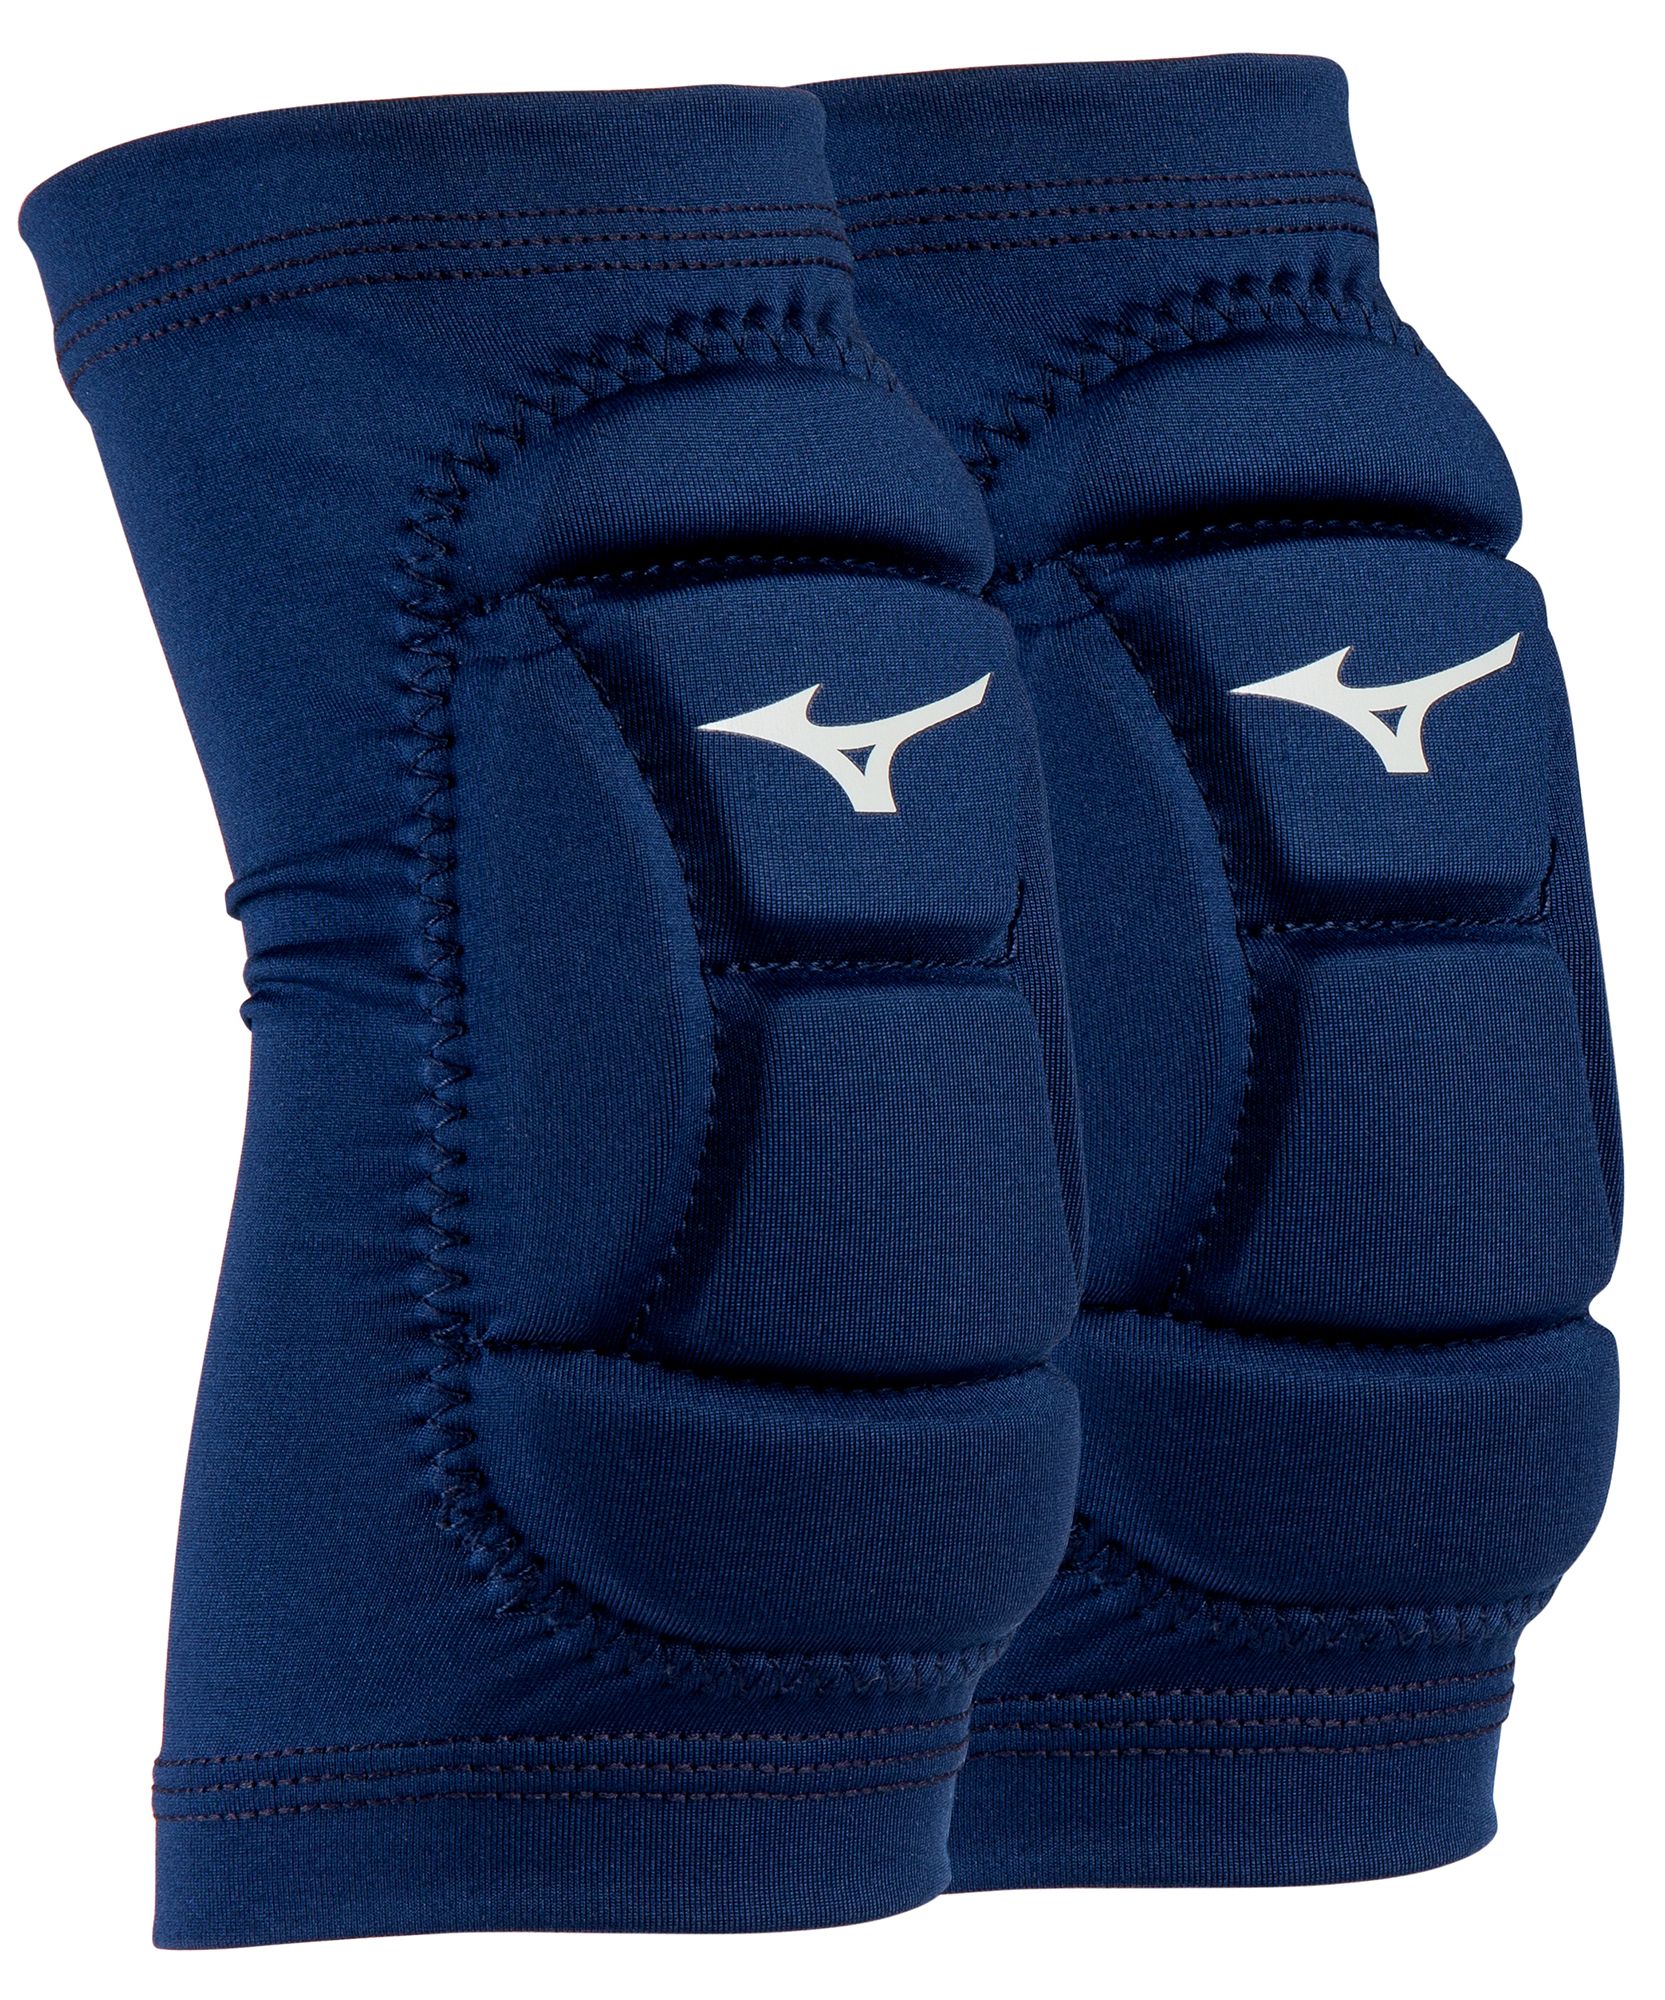  Mizuno Align Volleyball Pant Navy : Clothing, Shoes